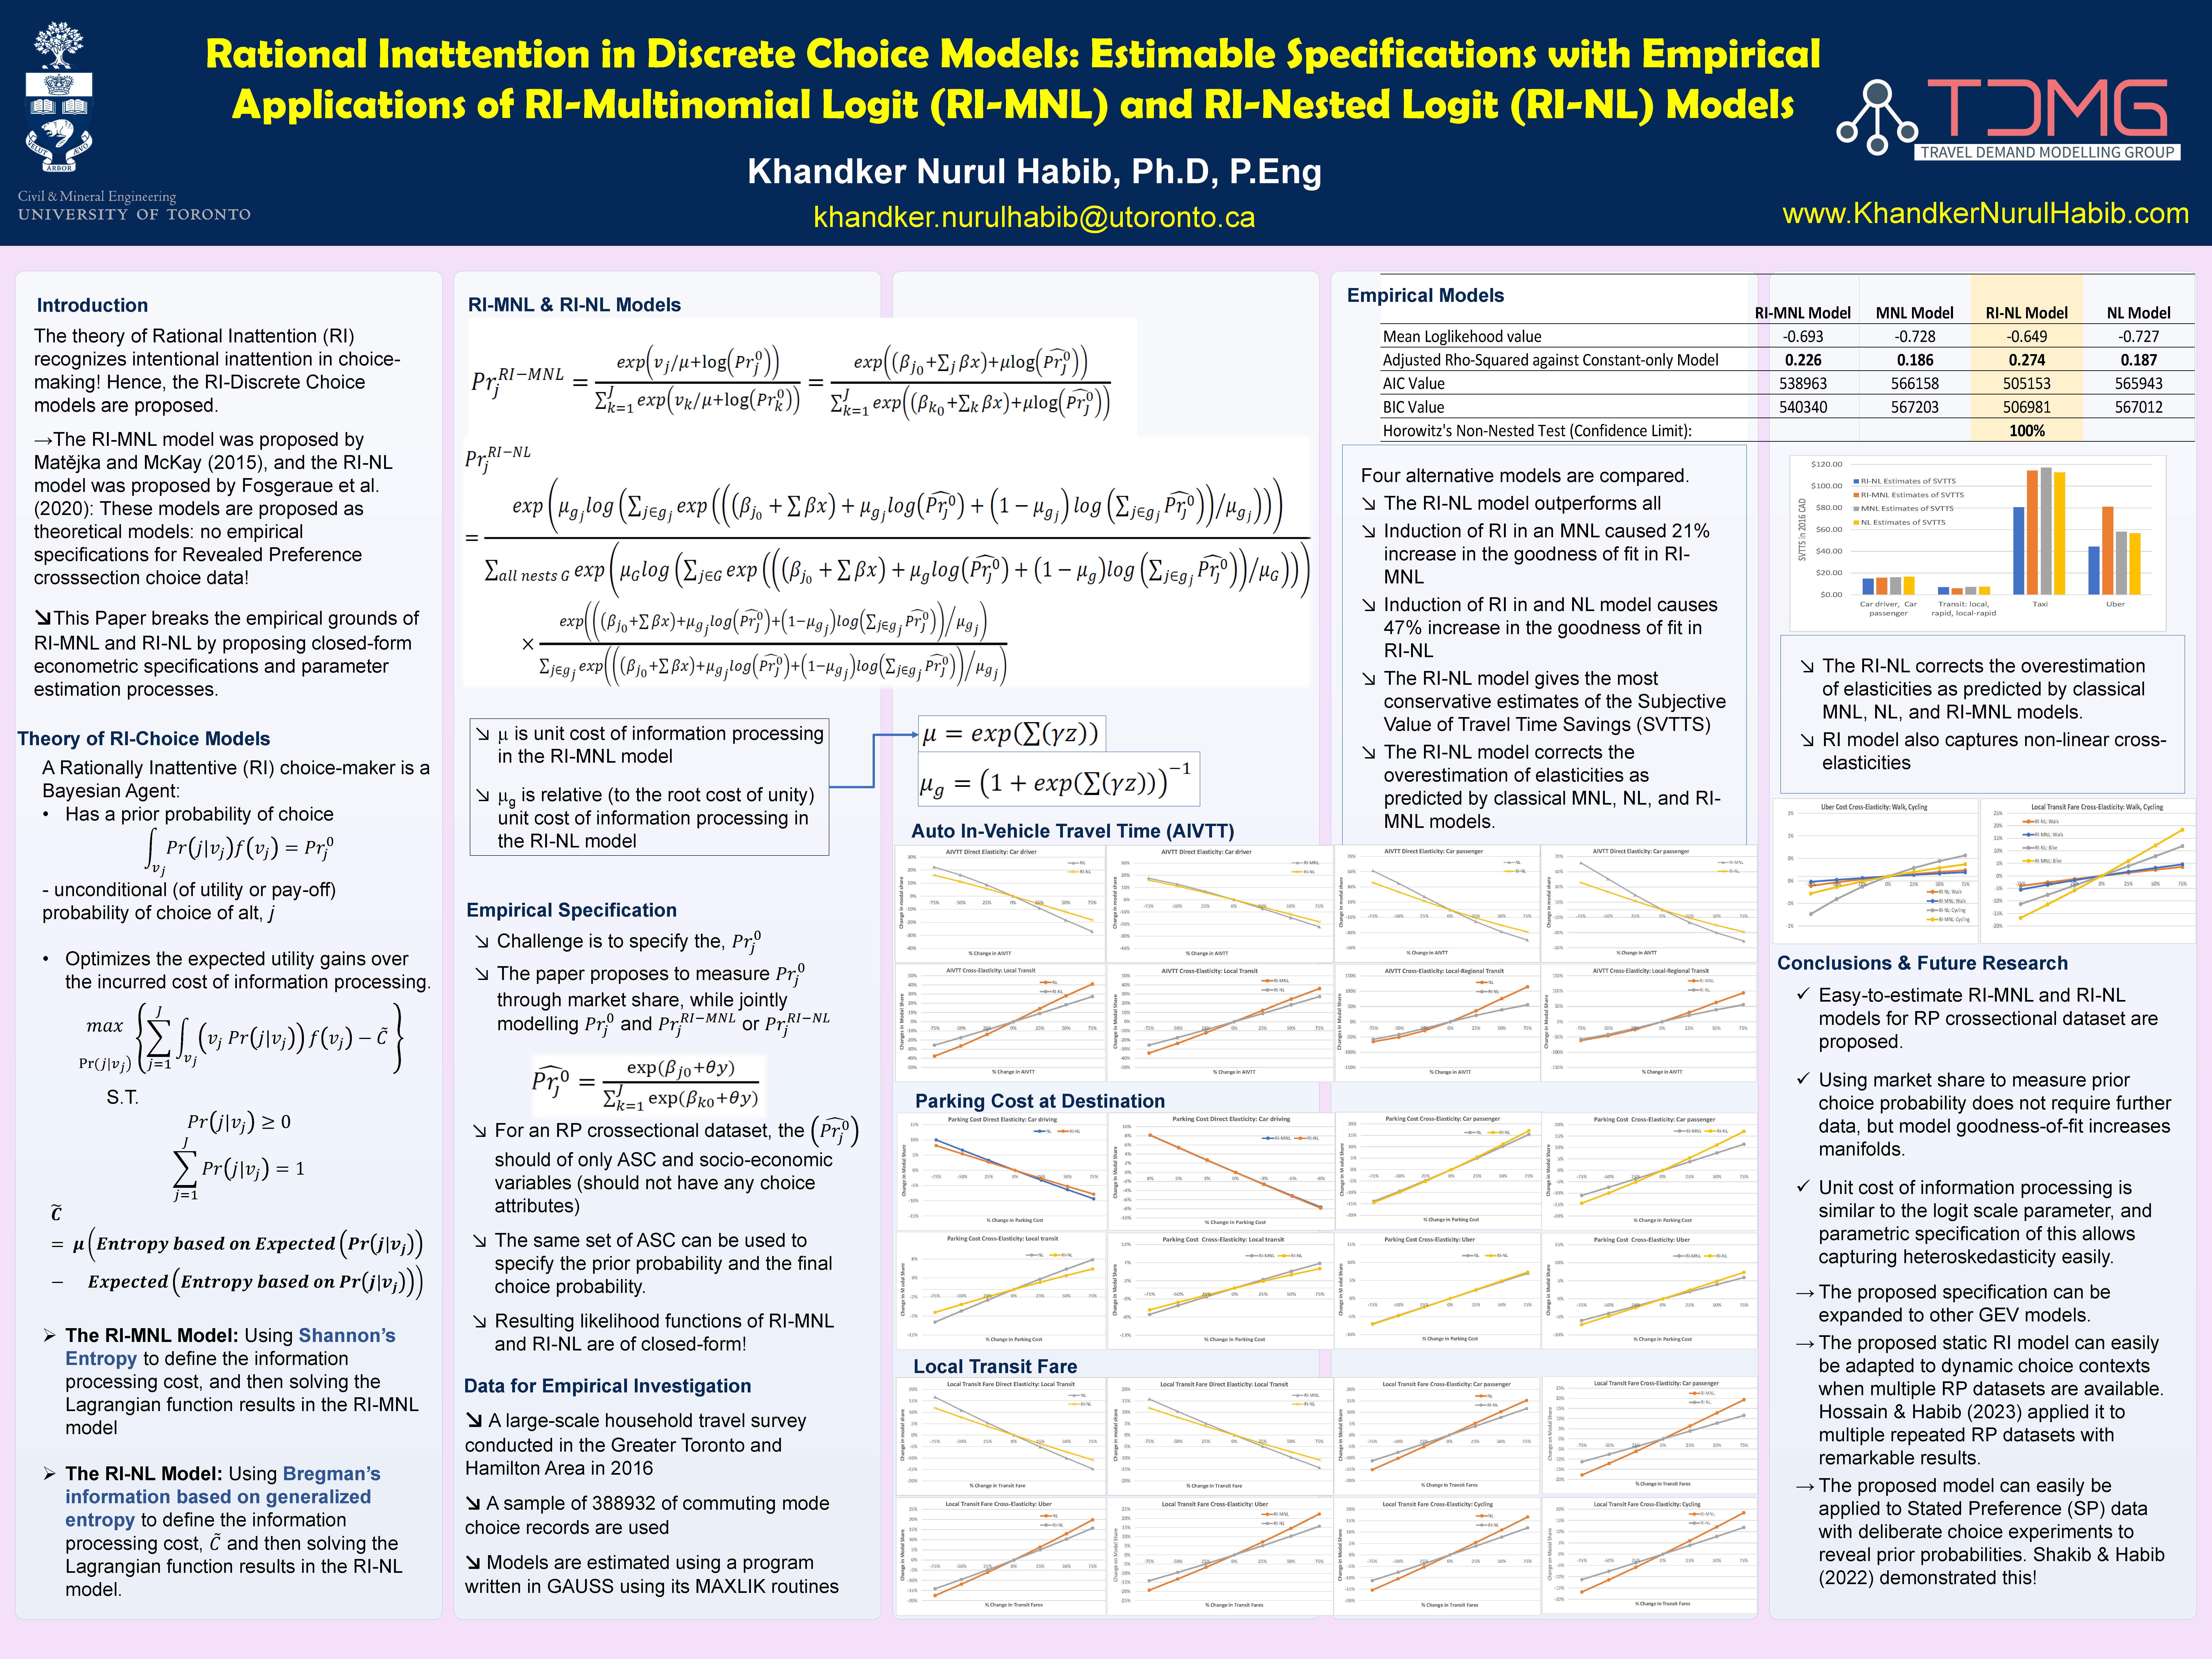 TRB 2023 Poster. Title: Rational Inattention in Discrete Choice Models: Estimable Specifications with Empirical Applications of RI-Multinomial Logit (RI-MNL) and RI-Nested Logit (RI-NL) Models. Author: Khandker Nurul Habib, PhD, P.Eng.